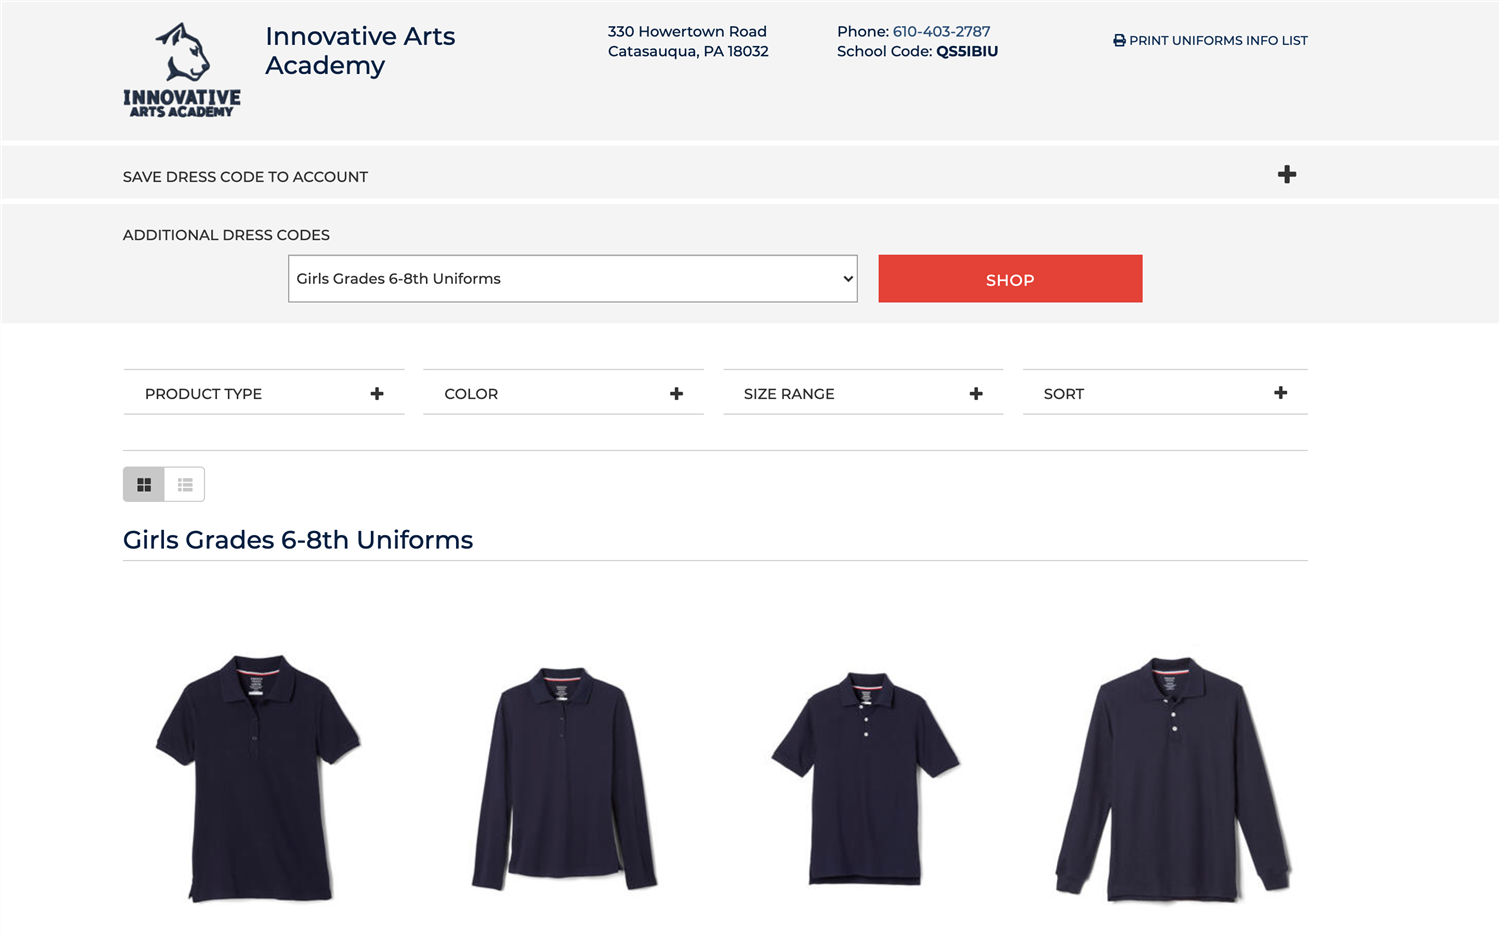 Picture of Innovative Arts Academy French Toast website to order clothes, picture is linked to French Toast website to order